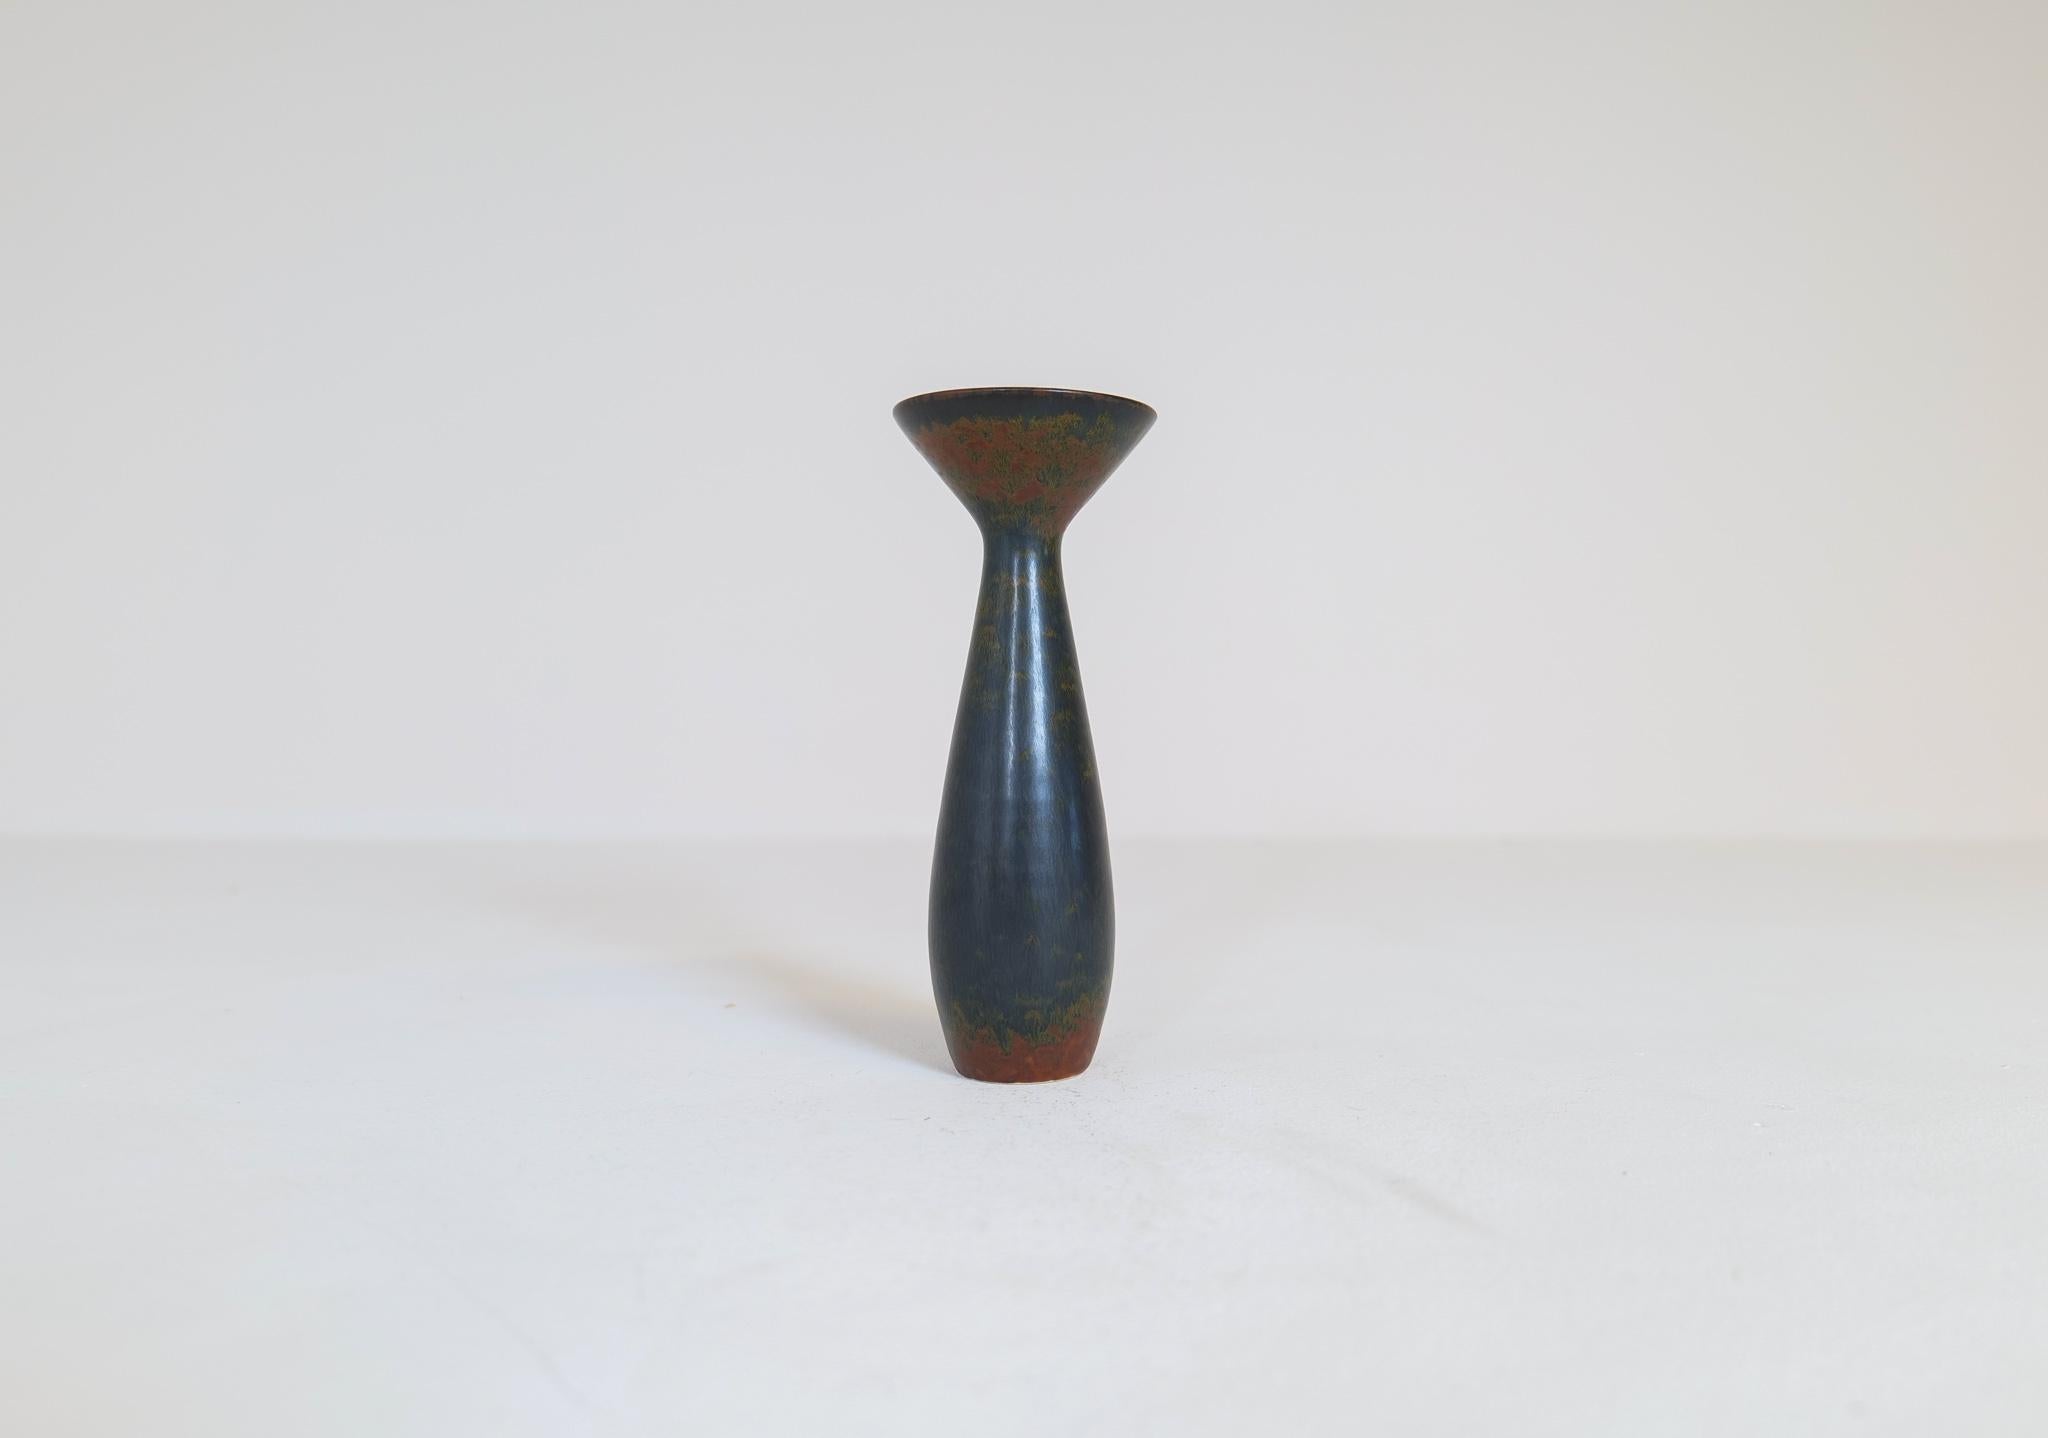 This vase from Rörstrand and maker or designer Carl Harry Stålhane, was made in Sweden in the midcentury. Its beautiful glazed combined with its incredible forms makes this an exceptional good piece. The glaze and organic shaped forms give birth to